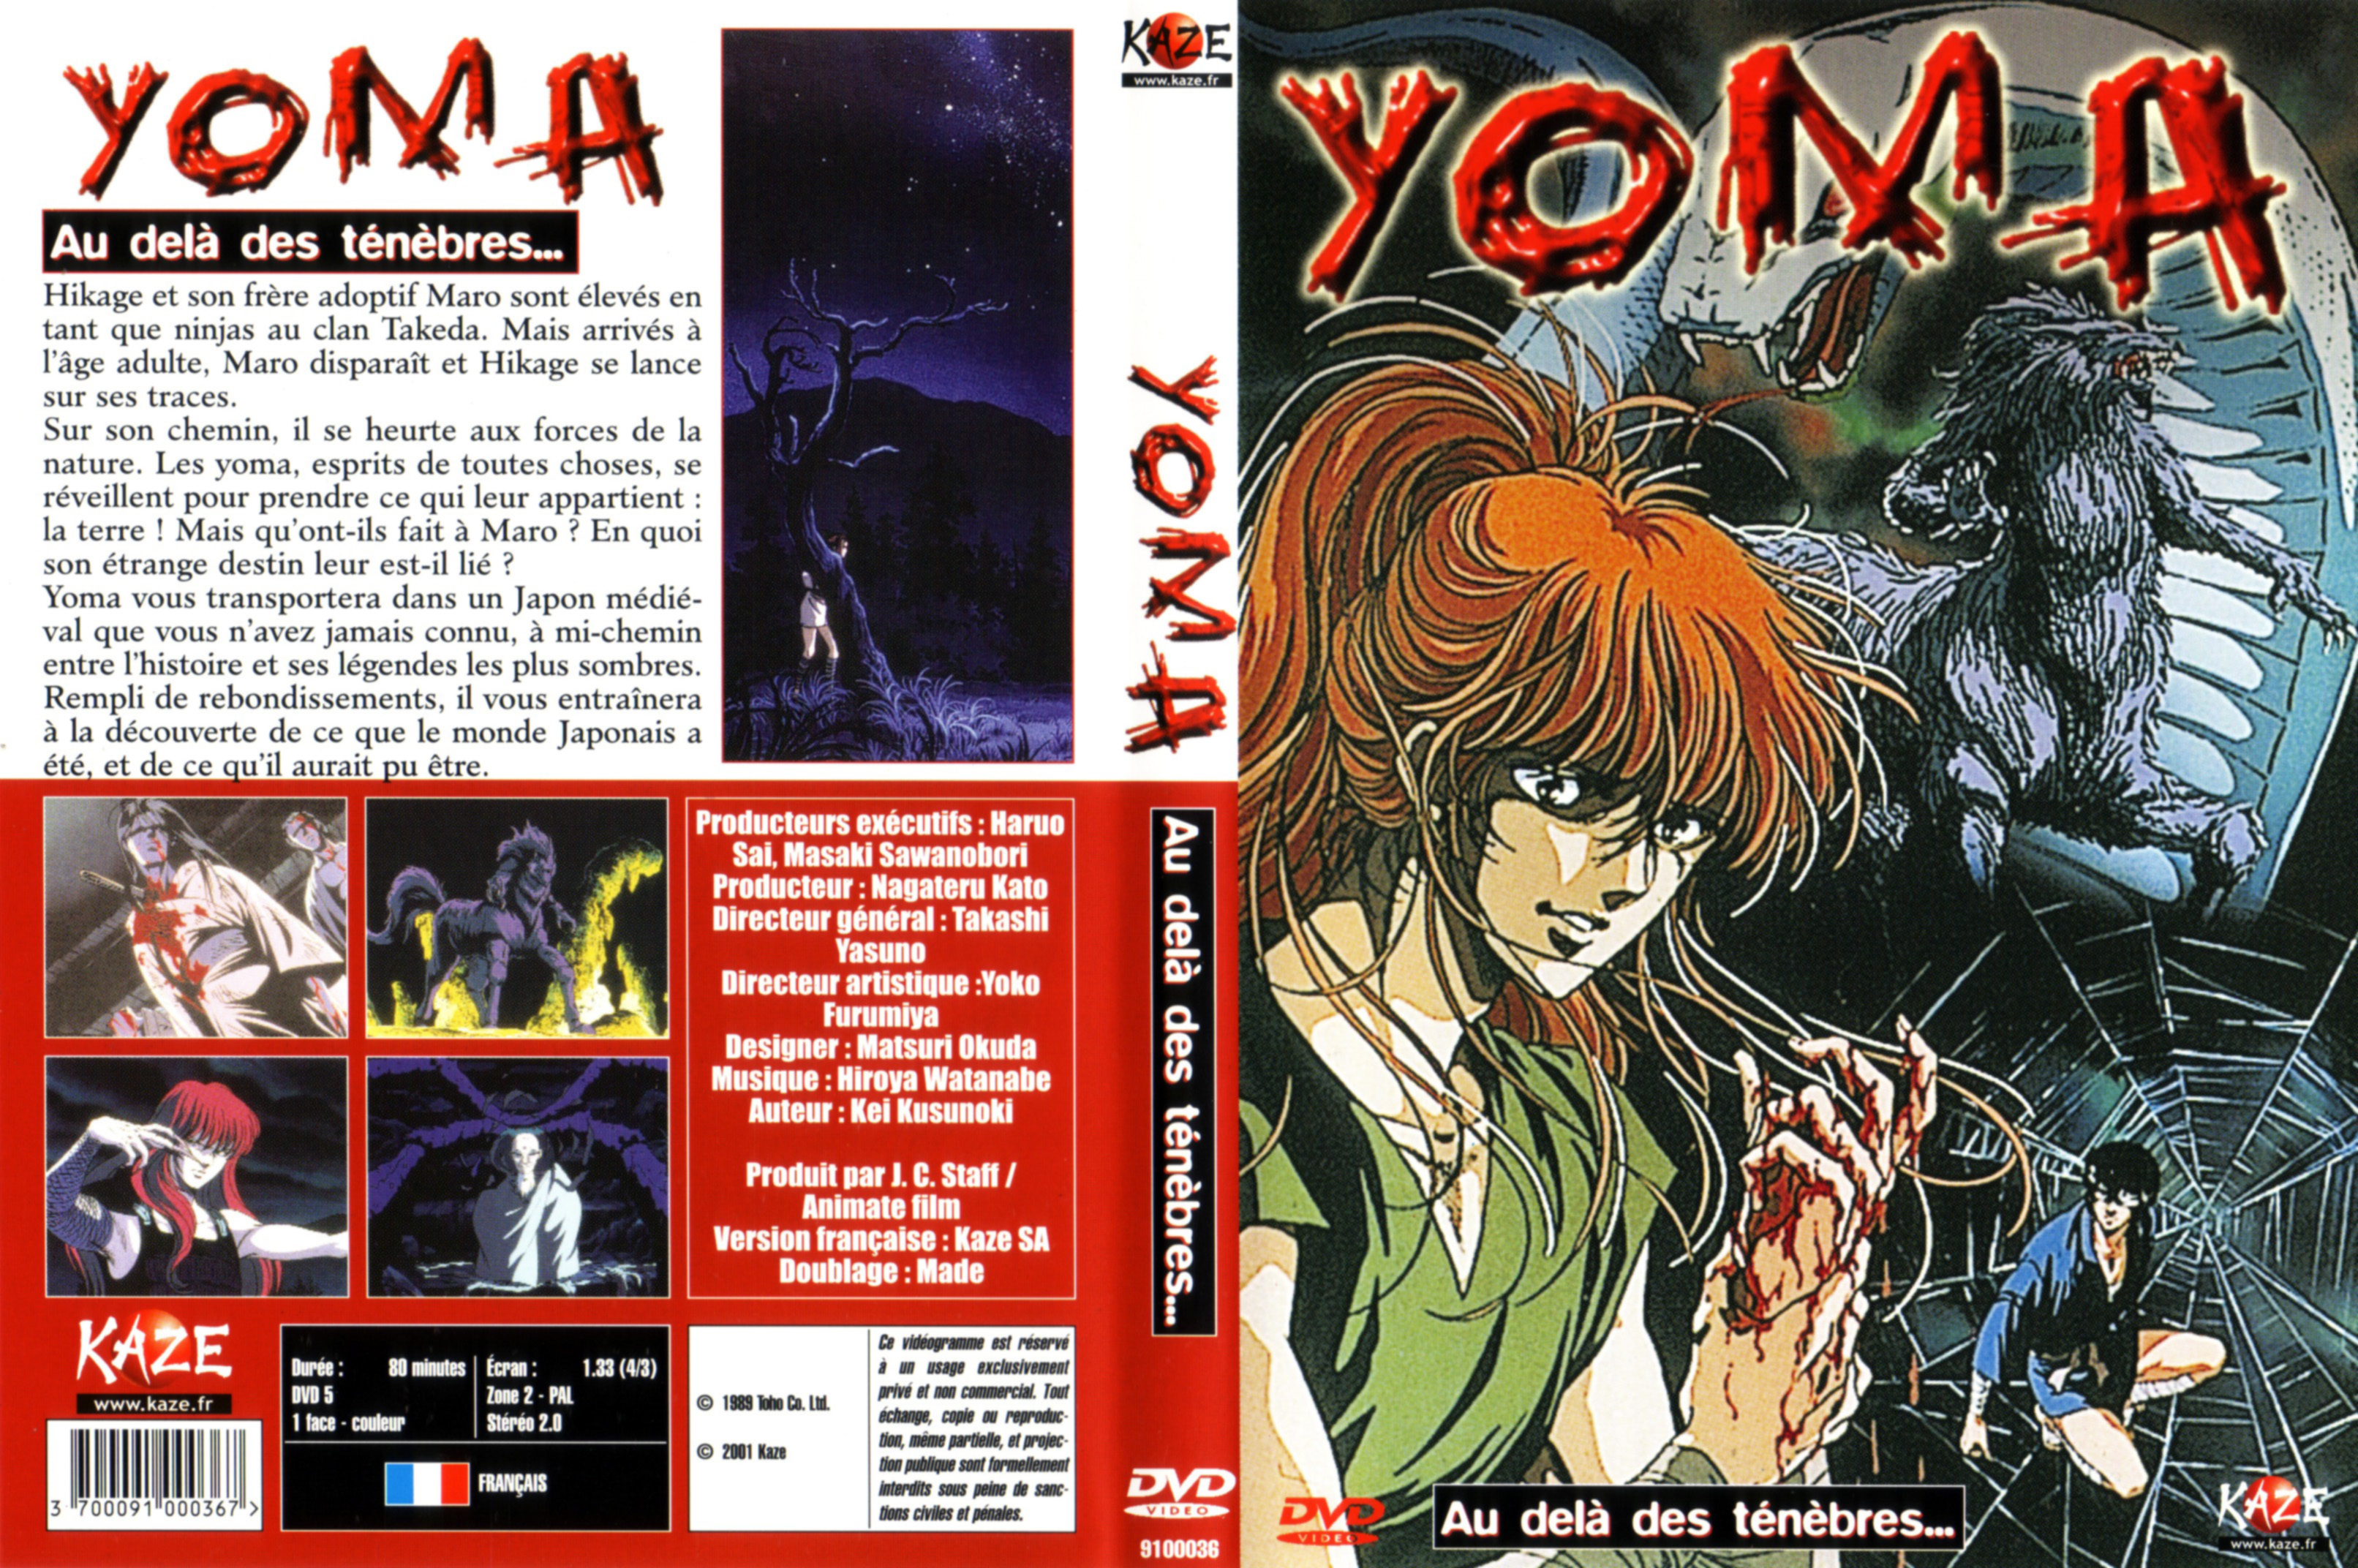 Jaquette DVD Yoma